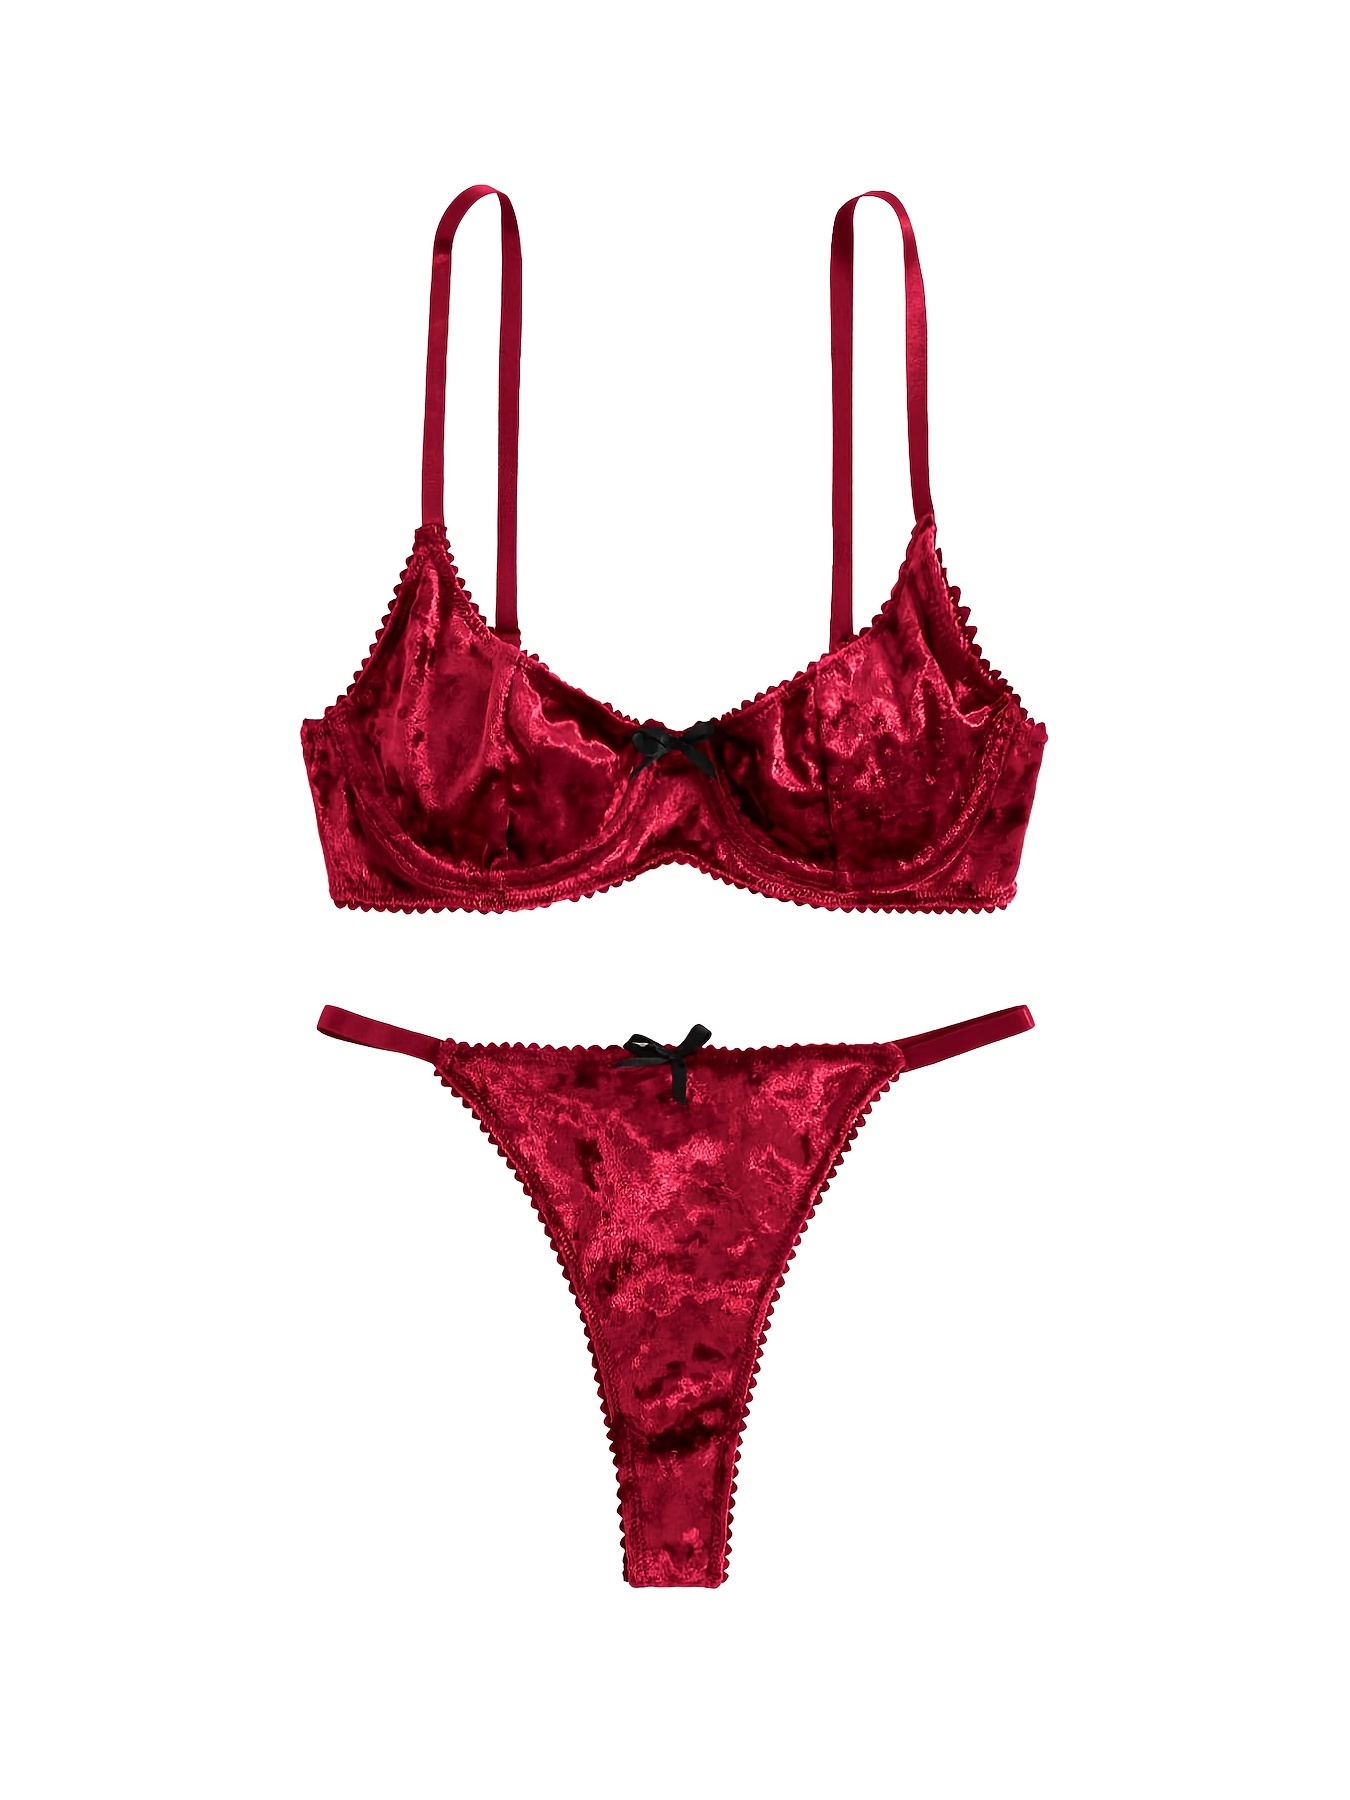 Luxurious Velvet Underwire Bra And Panty Set With Bow Knot Detail Enhance Your Feminine Curves